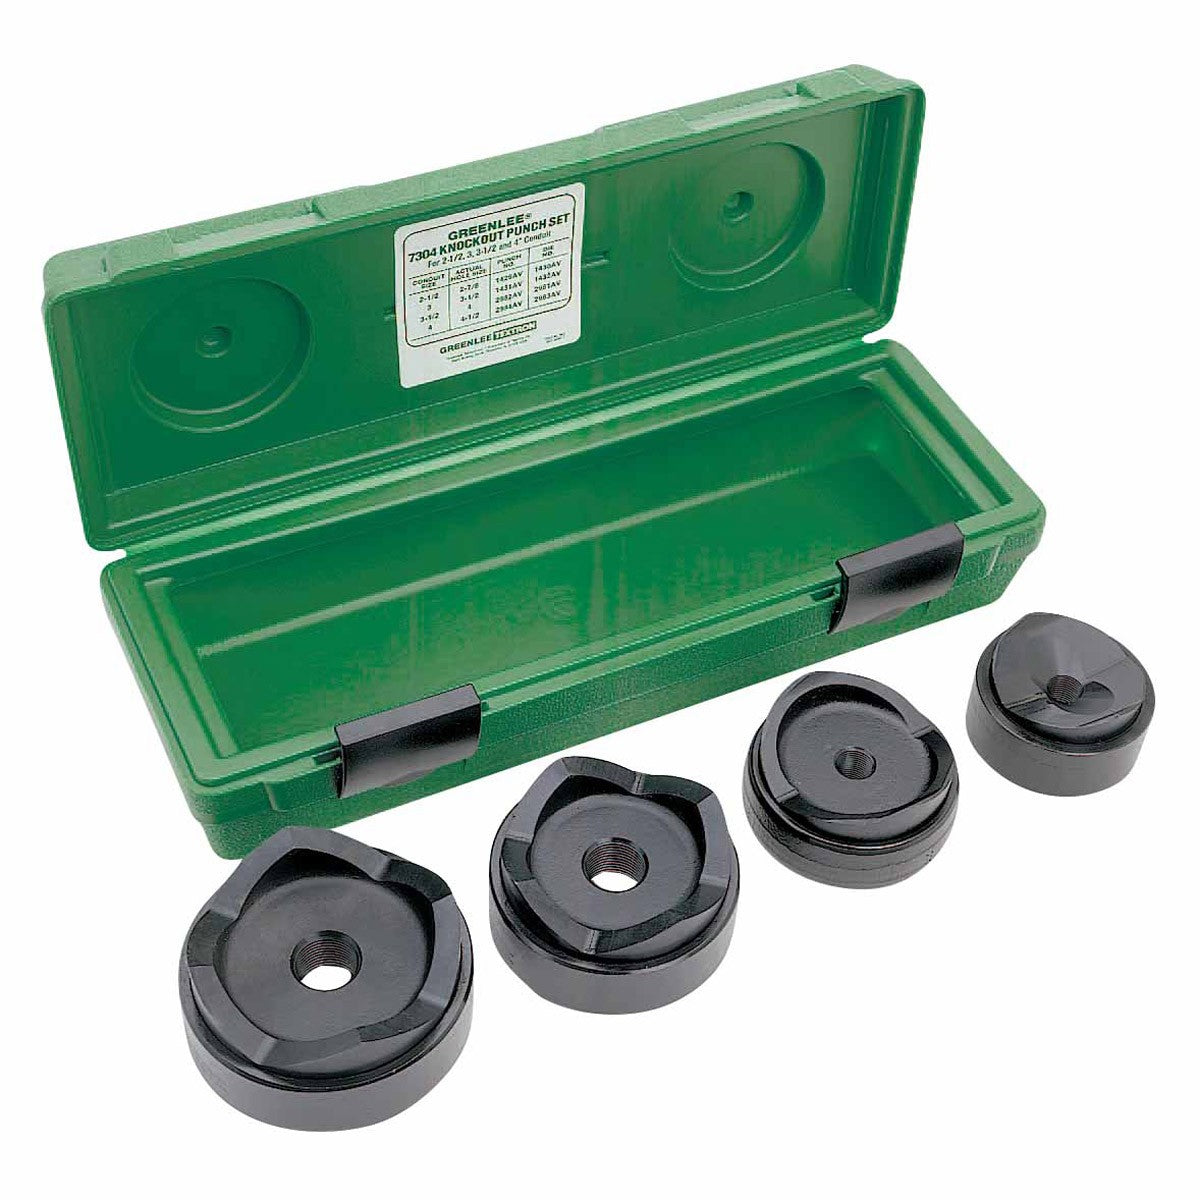 Greenlee 7304 2-1/2" - 4" Conduit Size Standard Round Knockout Punch Kit